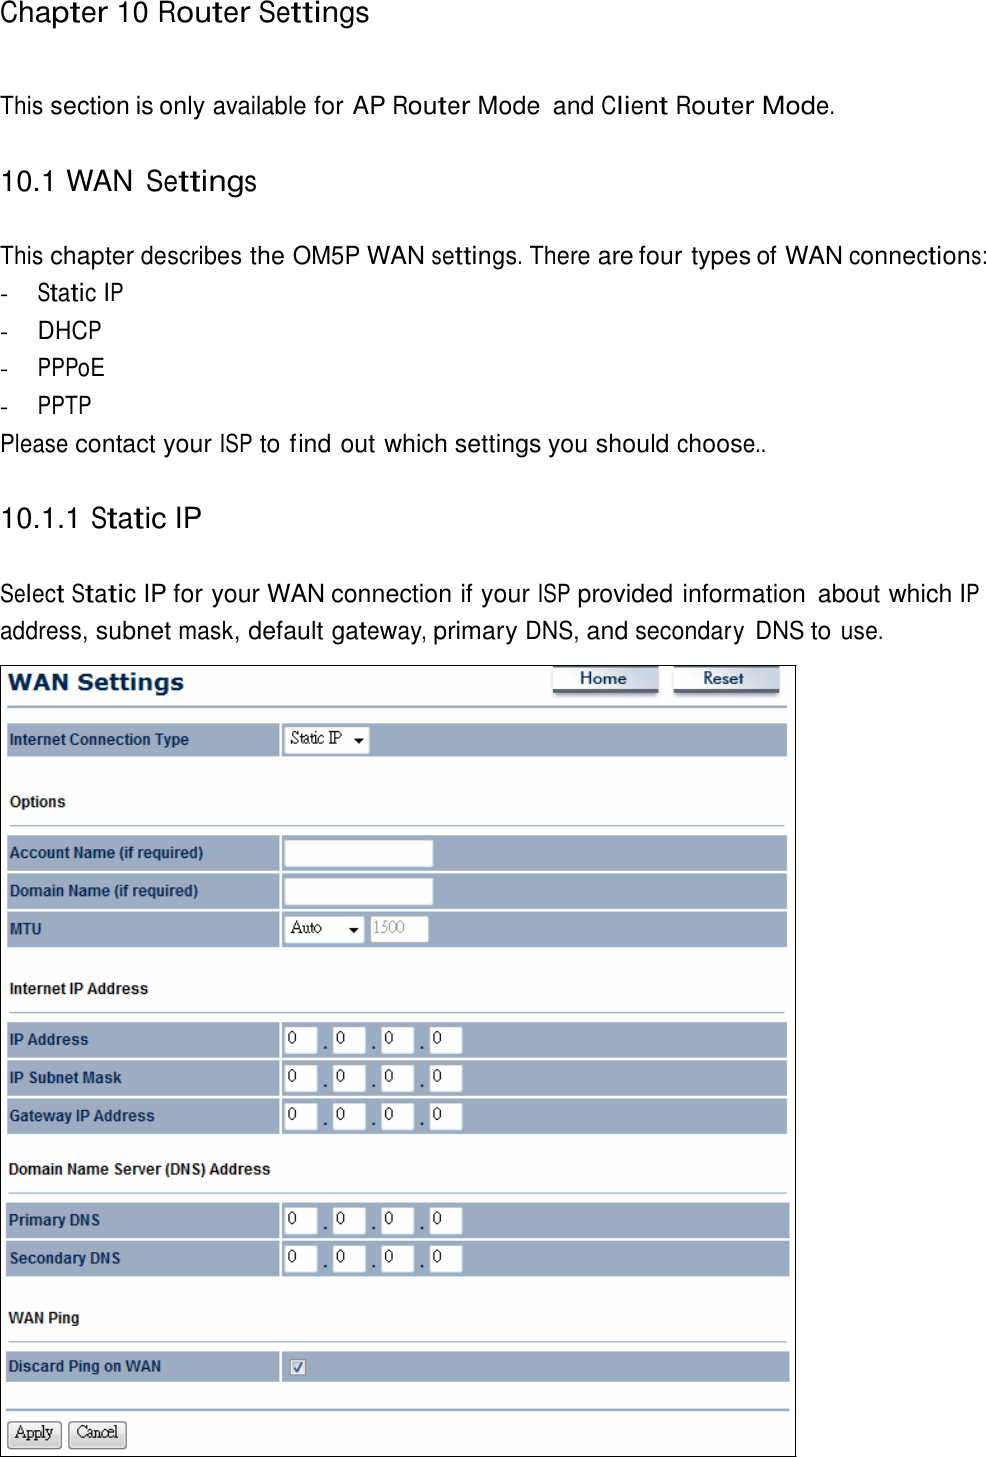   Chapter 10 Router Settings    This section is only available for AP Router Mode  and Client Router Mode.   10.1 WAN Settings   This chapter describes the OM5P WAN settings. There are four types of WAN connections: - Static IP - DHCP - PPPoE - PPTP Please contact your ISP to find out which settings you should choose..   10.1.1 Static IP   Select Static IP for your WAN connection if your ISP provided information  about which IP address, subnet mask, default gateway, primary DNS, and secondary  DNS to use. 